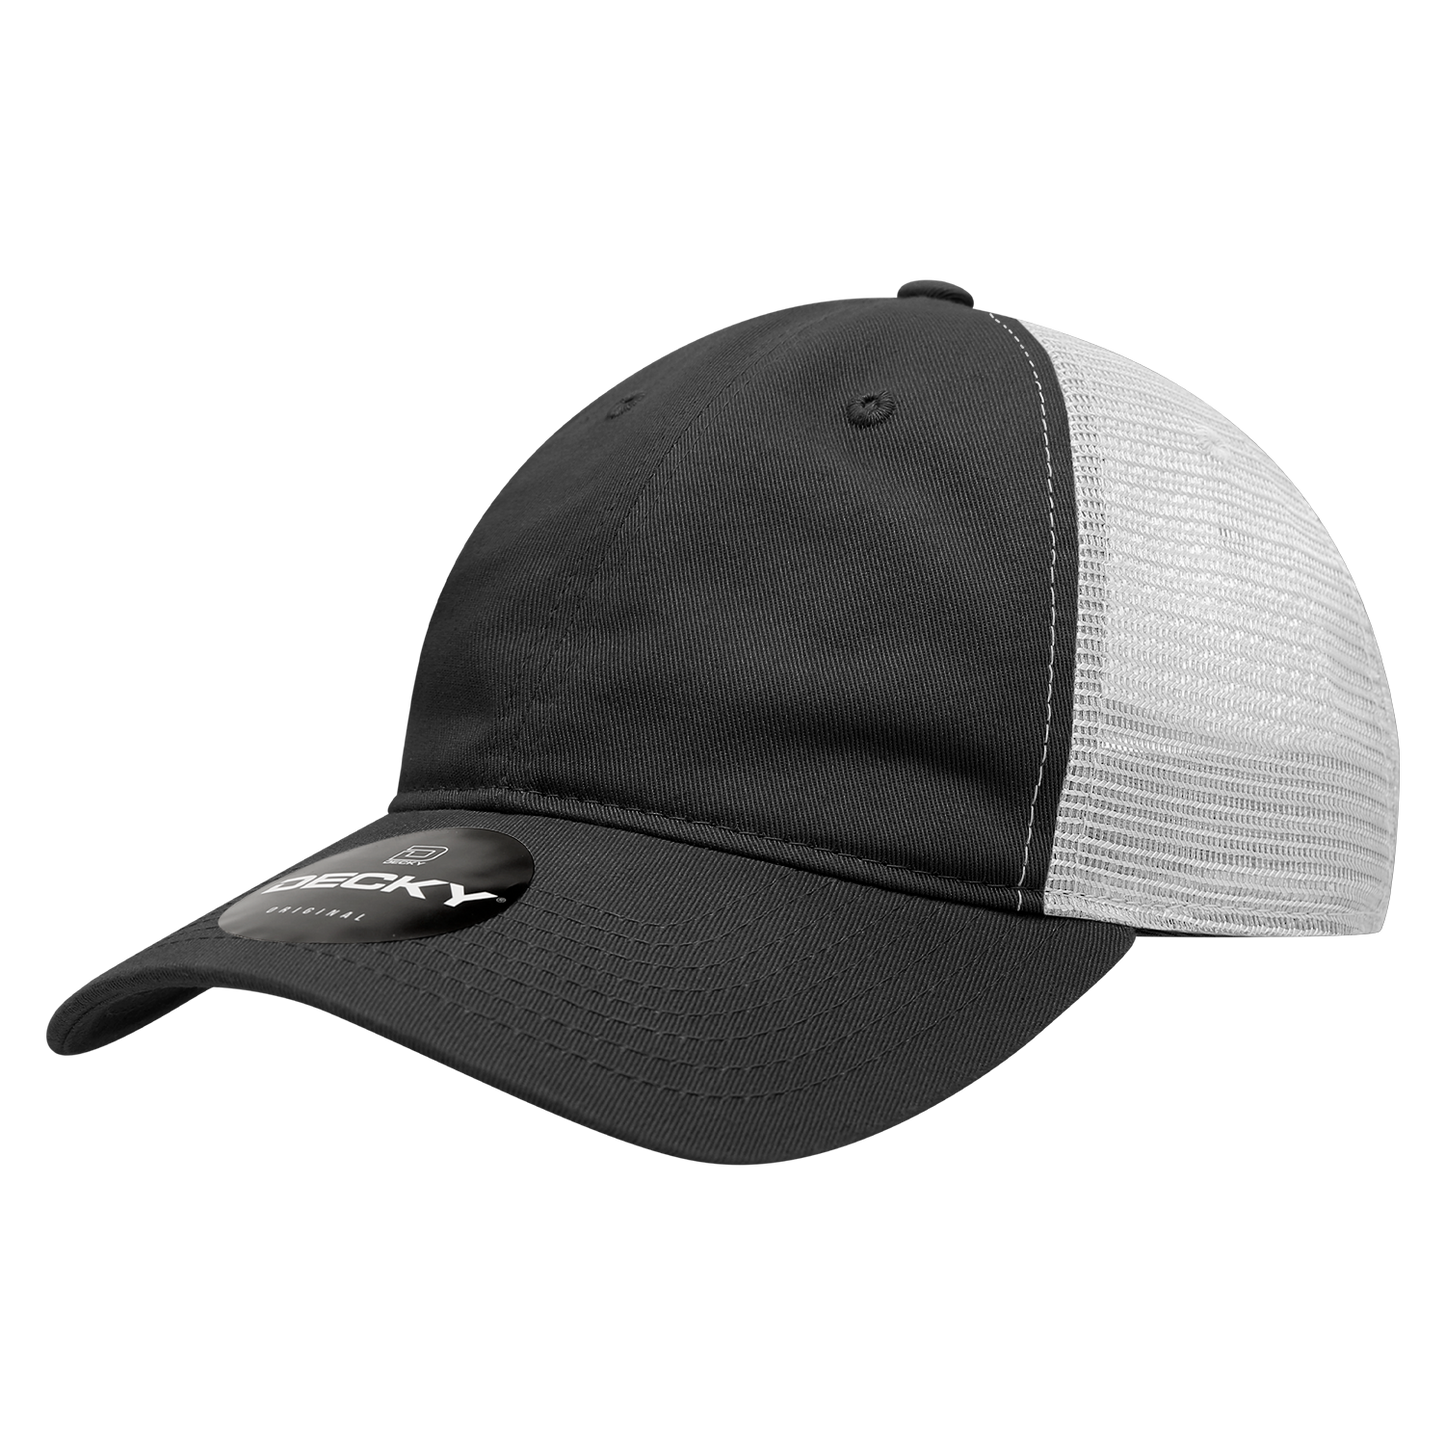 Decky 120 6-Panel Low Profile Relaxed Cotton Trucker Cap - Blank